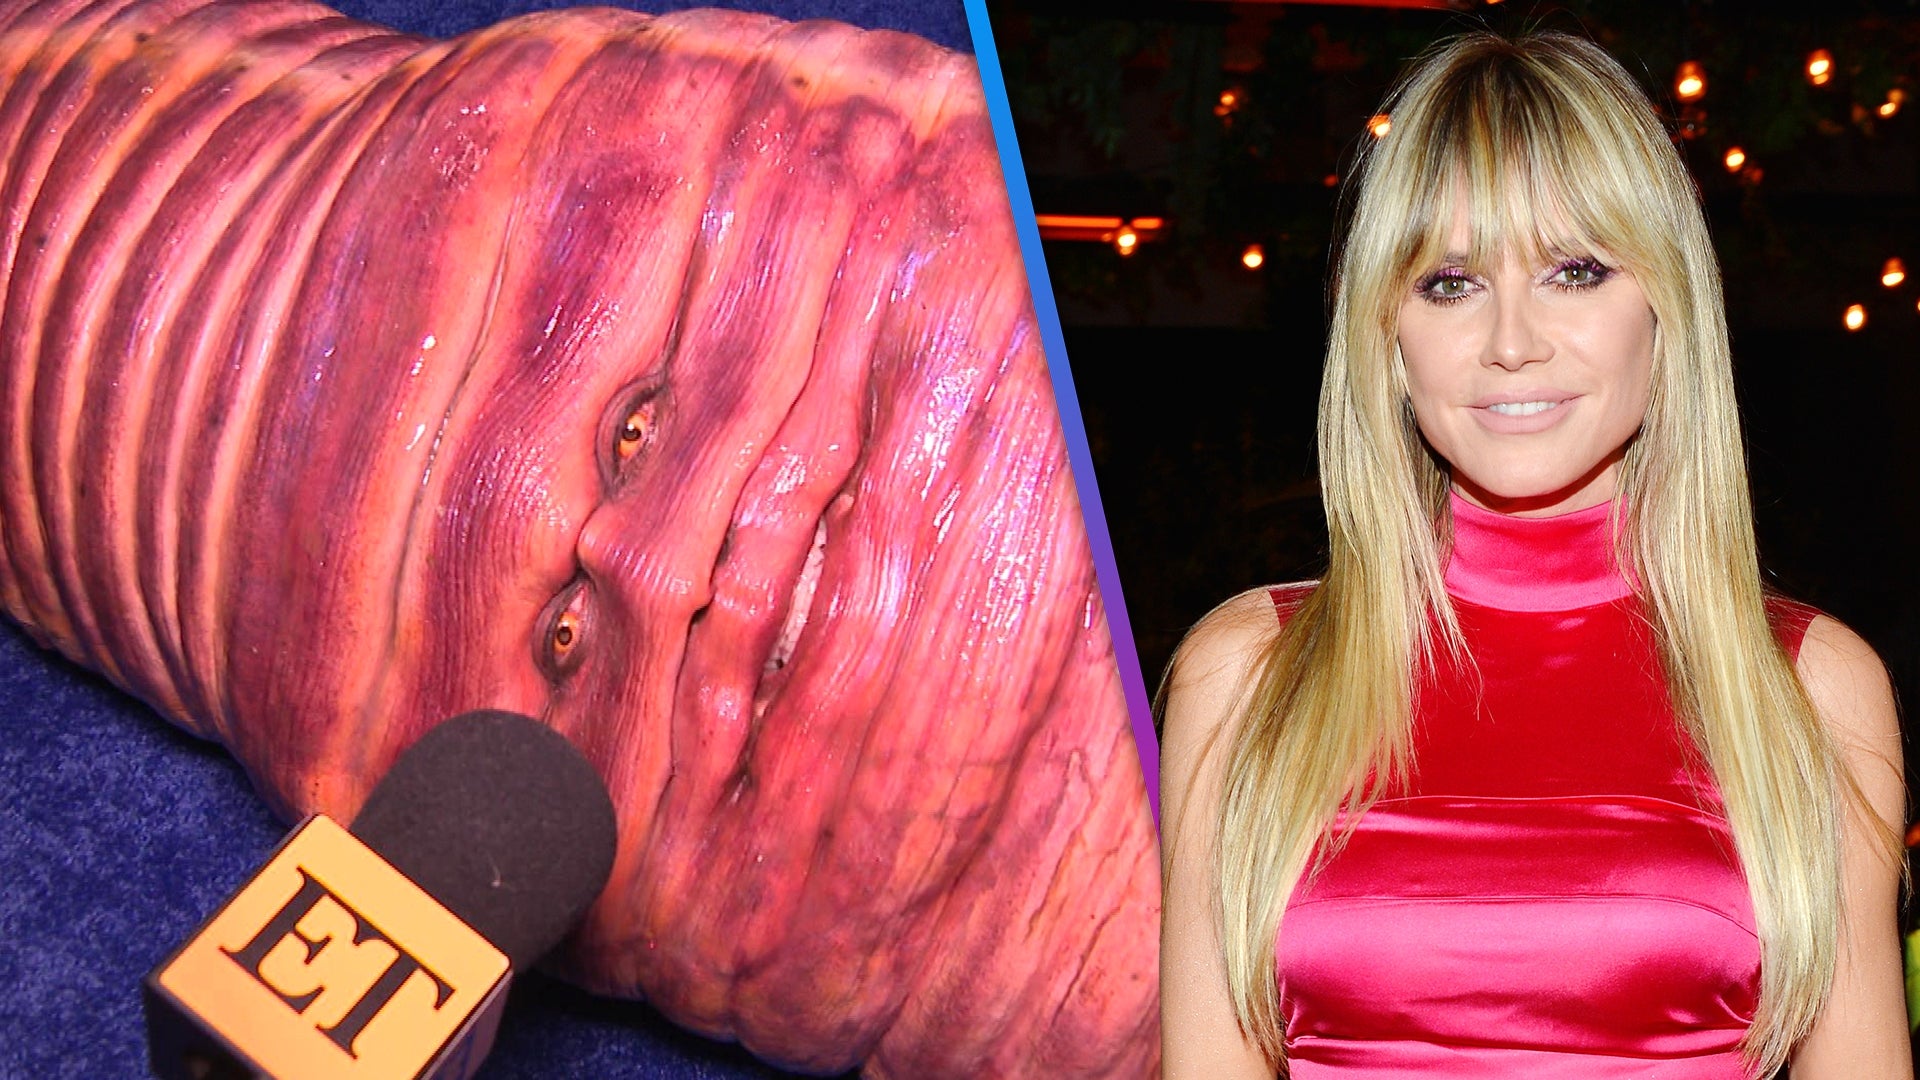 Heidi Klum S Worm Halloween Costume How She Pulled Off The Over The Top Look